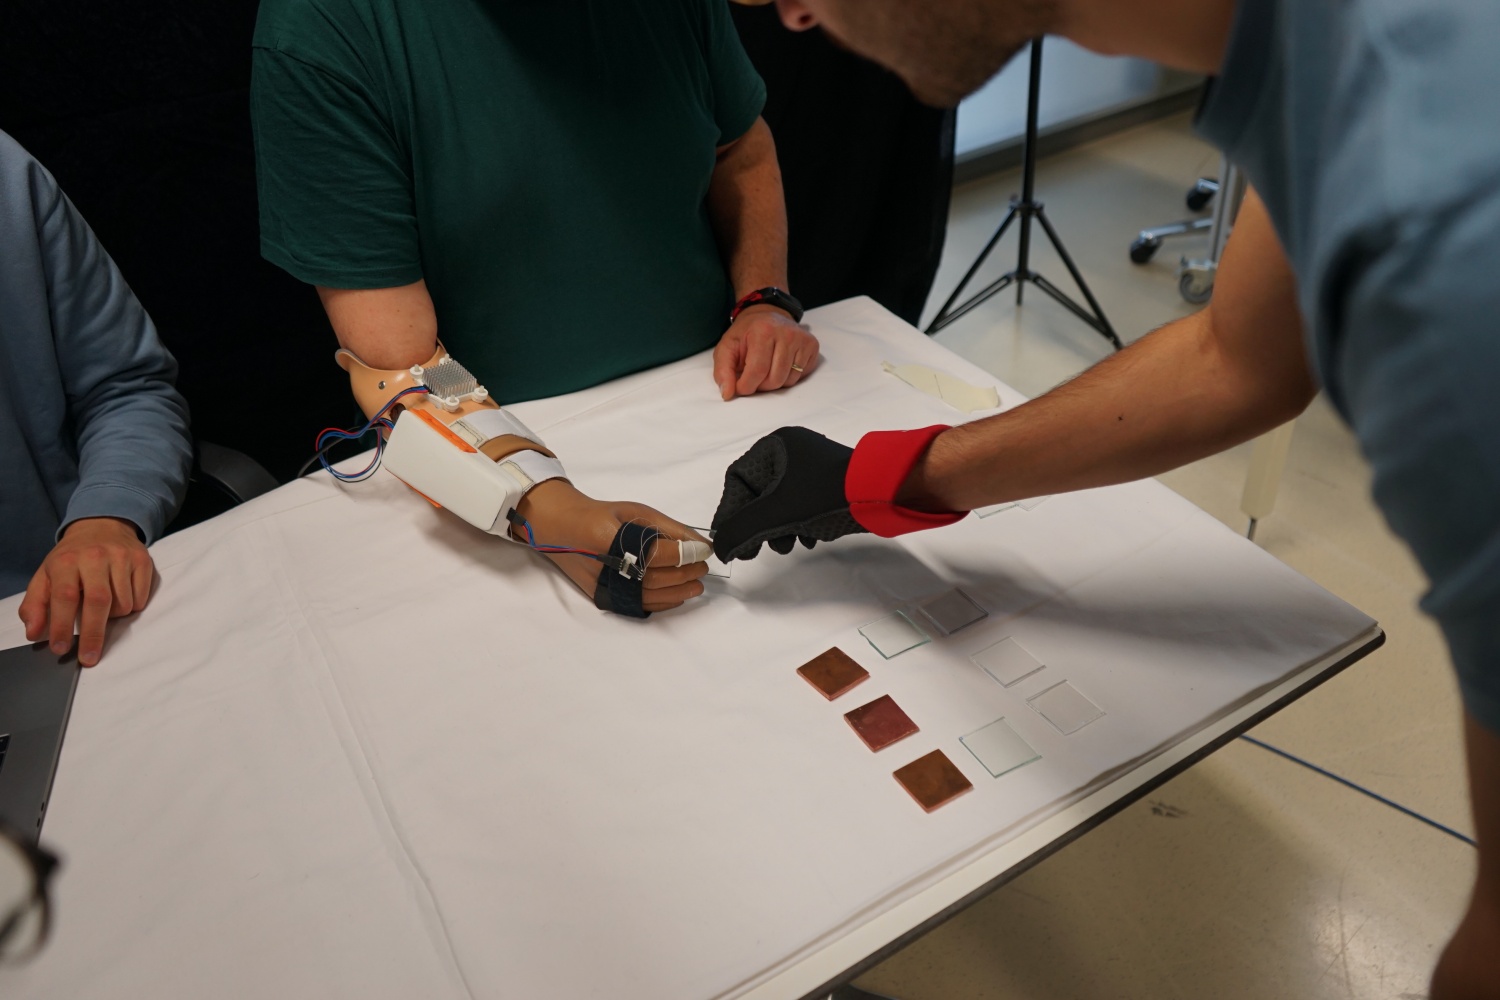  Scientists have created a device for amputees to feel natural temperatures in prosthetic limbs.